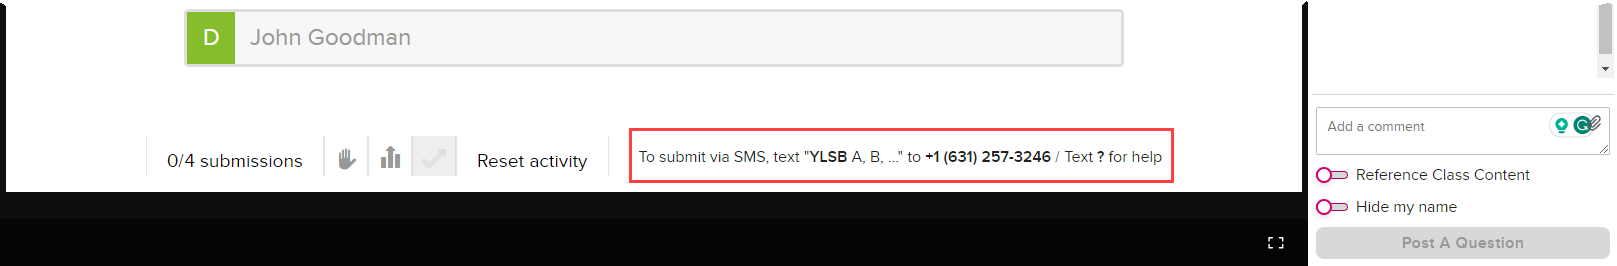 SMS response instructions on an activity slide